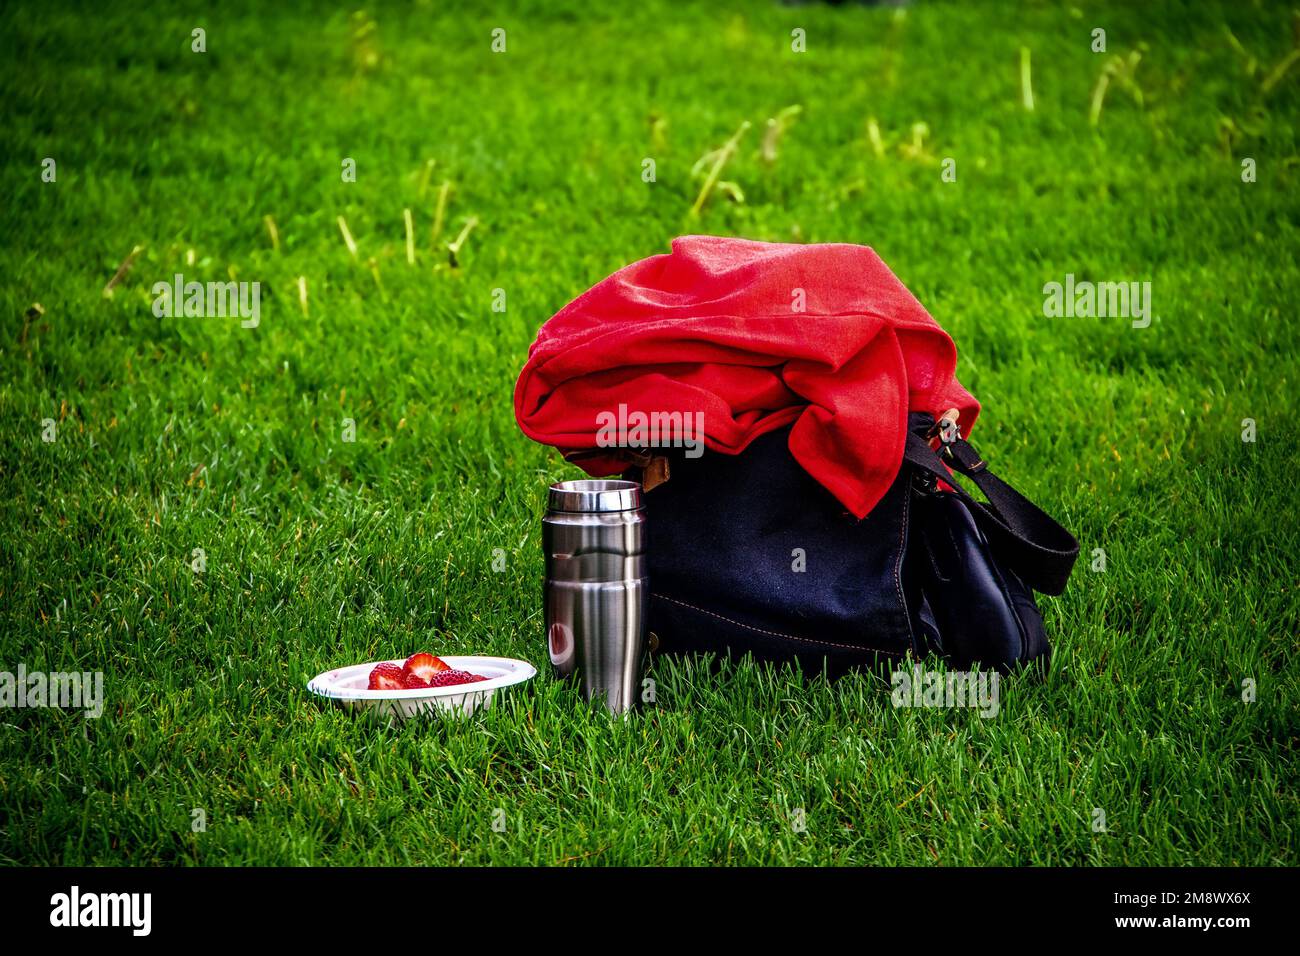 Ready for a journey - Denim bag on grass with coffee themos and bowl of strawberries and red fleece jacket thrown on top Stock Photo